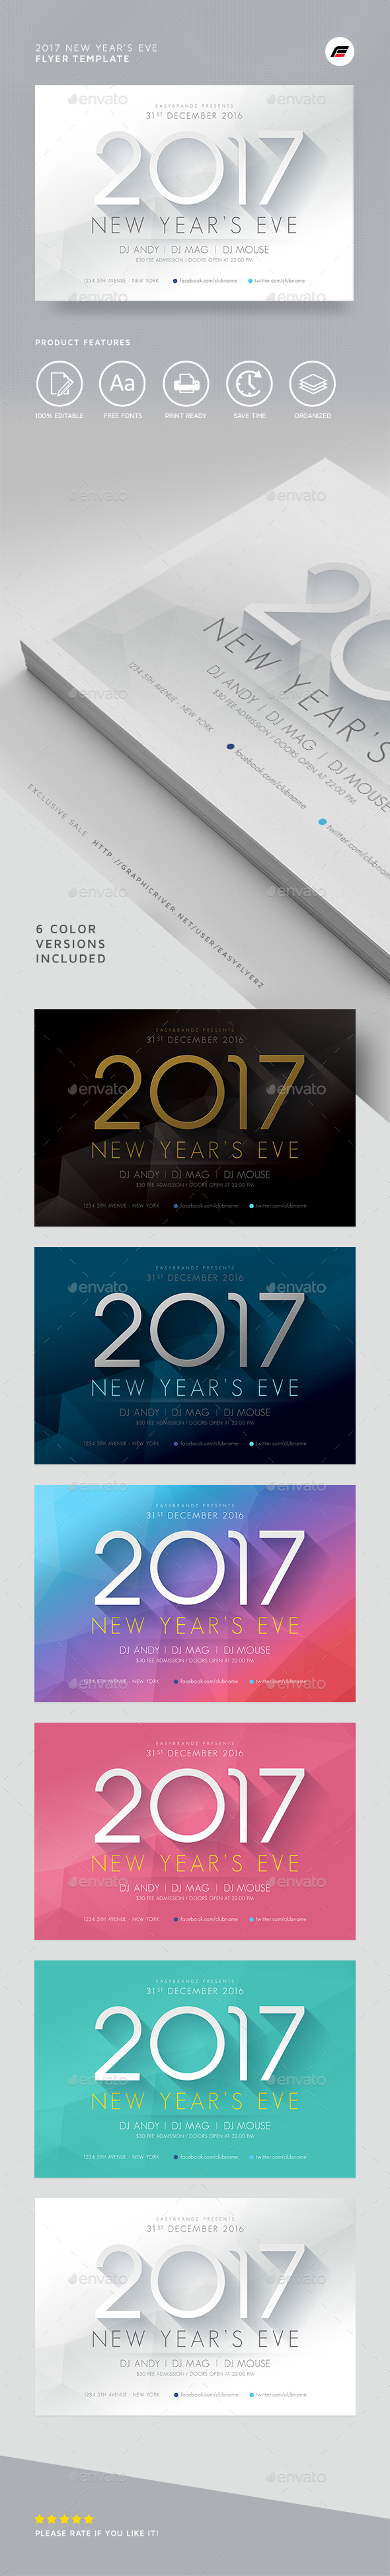 2017 New Years Flyer Template